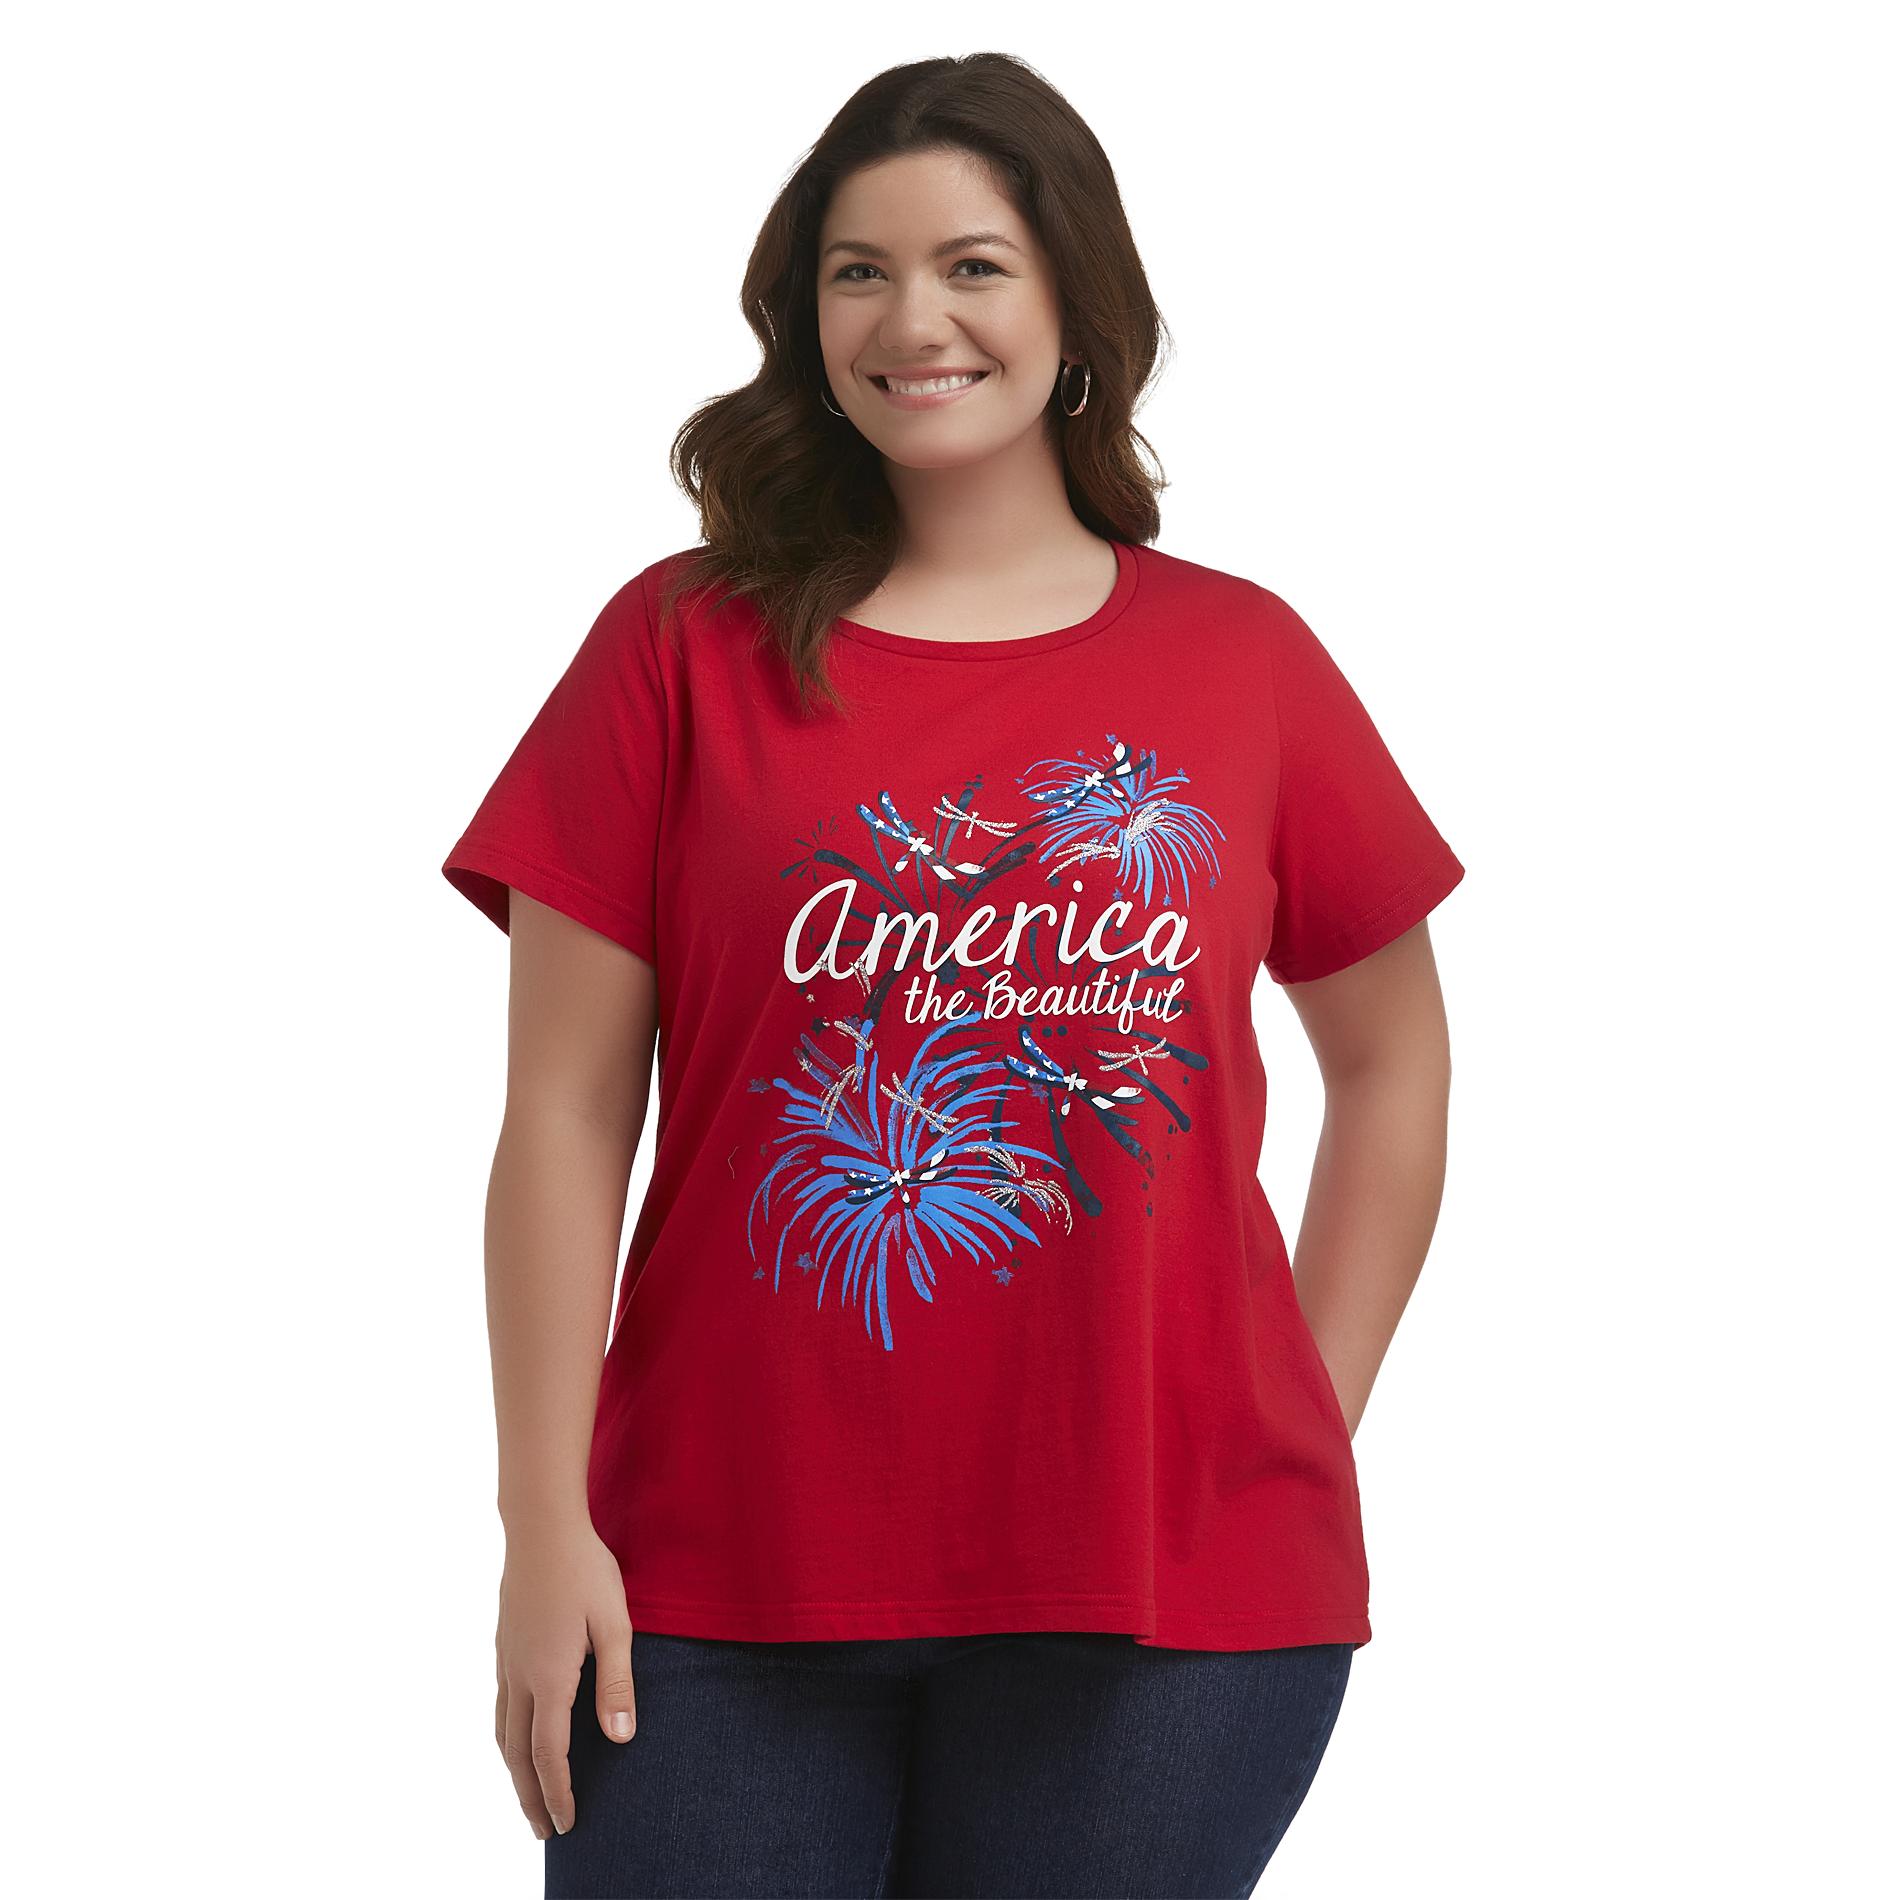 Holiday Editions Women's Plus Graphic T-Shirt - Fireworks